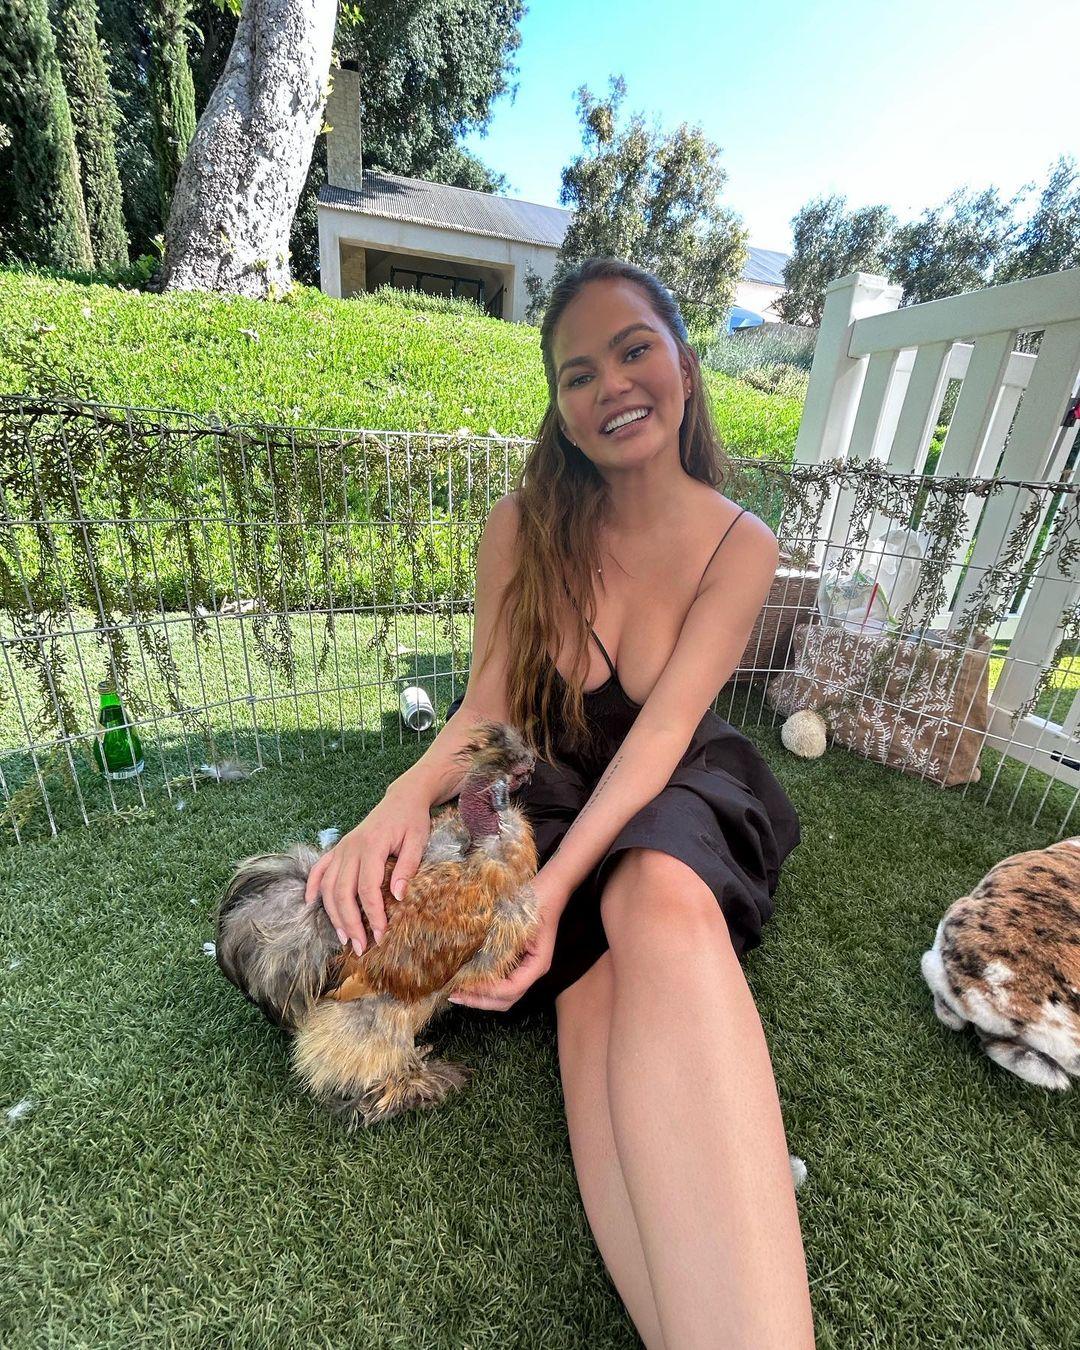 Chrissy Teigen flaunts cleavage while playing with animals